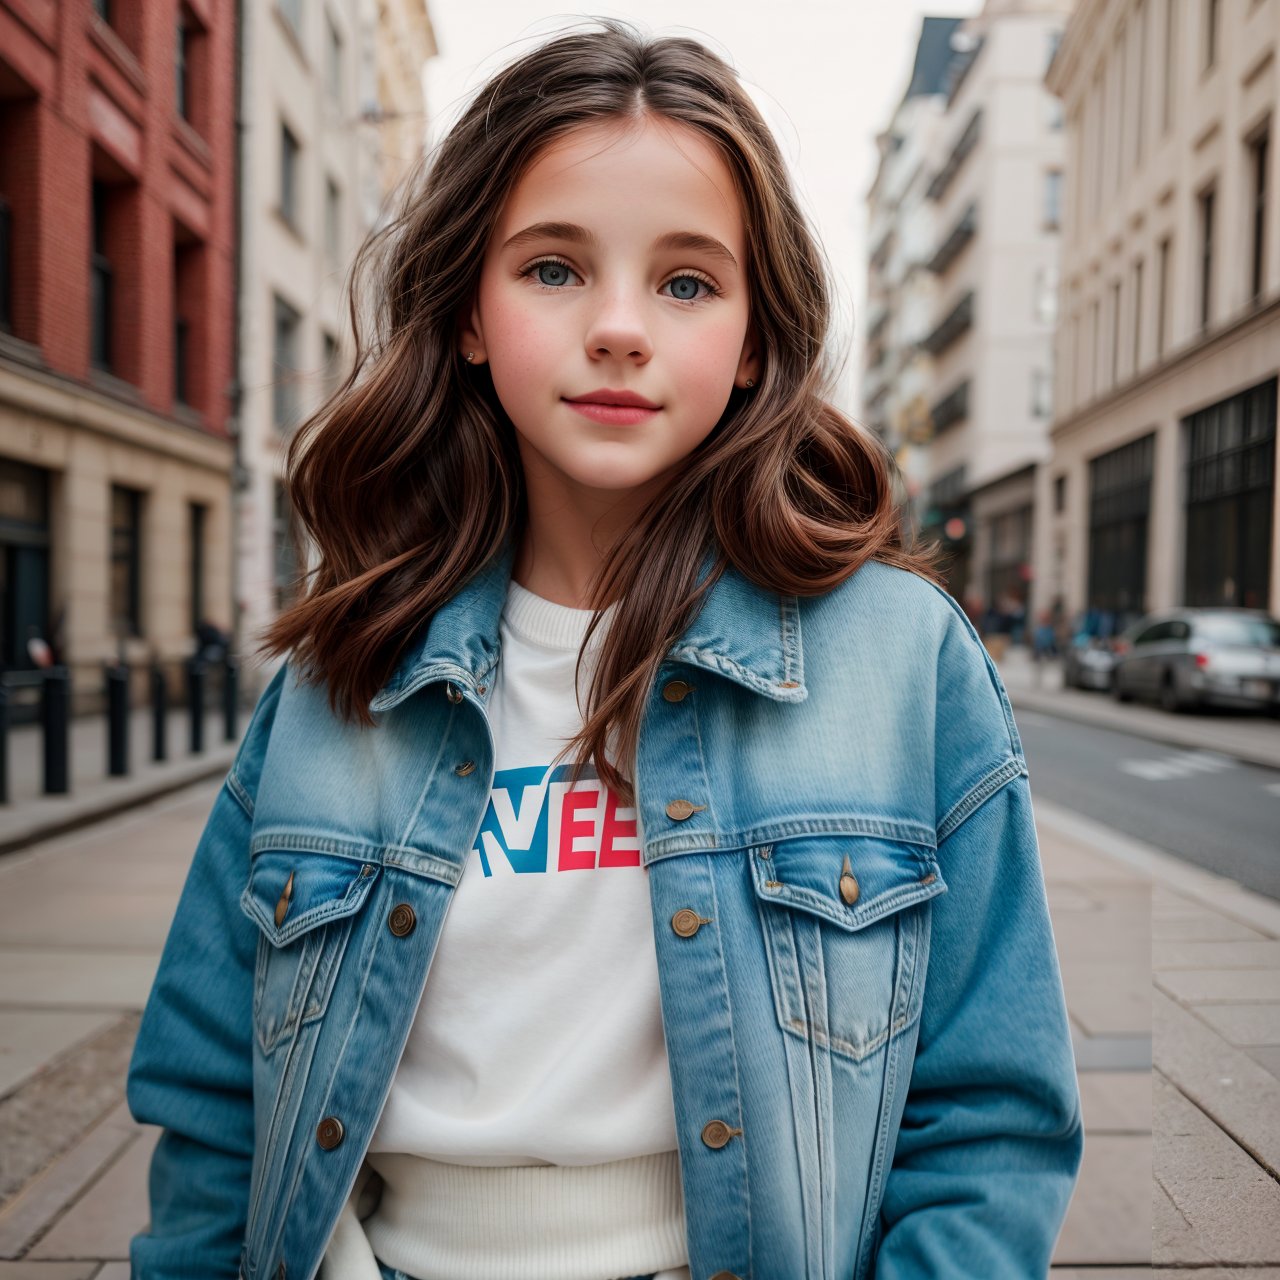 best quality, looking back, portrait of stunning (AIDA_LoRA_arusso:1.16) <lora:AIDA_LoRA_arusso:0.69> as little girl wearing a denim jacket posing on the street, outdoors, pretty face, flirting, cinematic, composition, studio photo, studio photo, kkw-ph1, hdr, f1.6, getty images, (colorful:1.1)